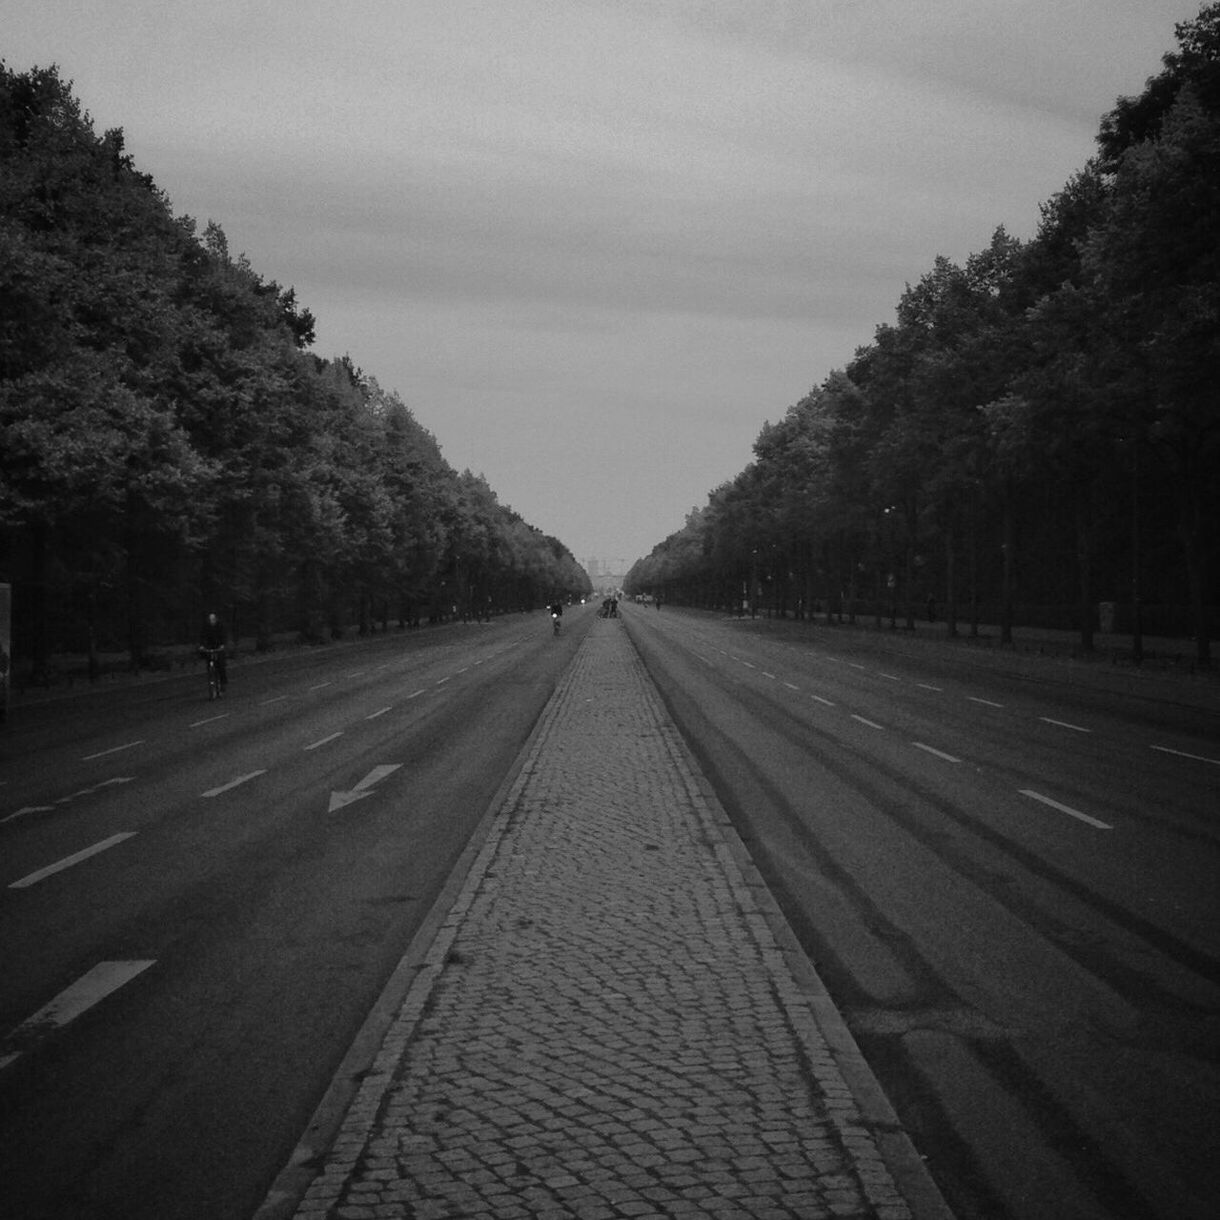 Highway amidst trees against sky